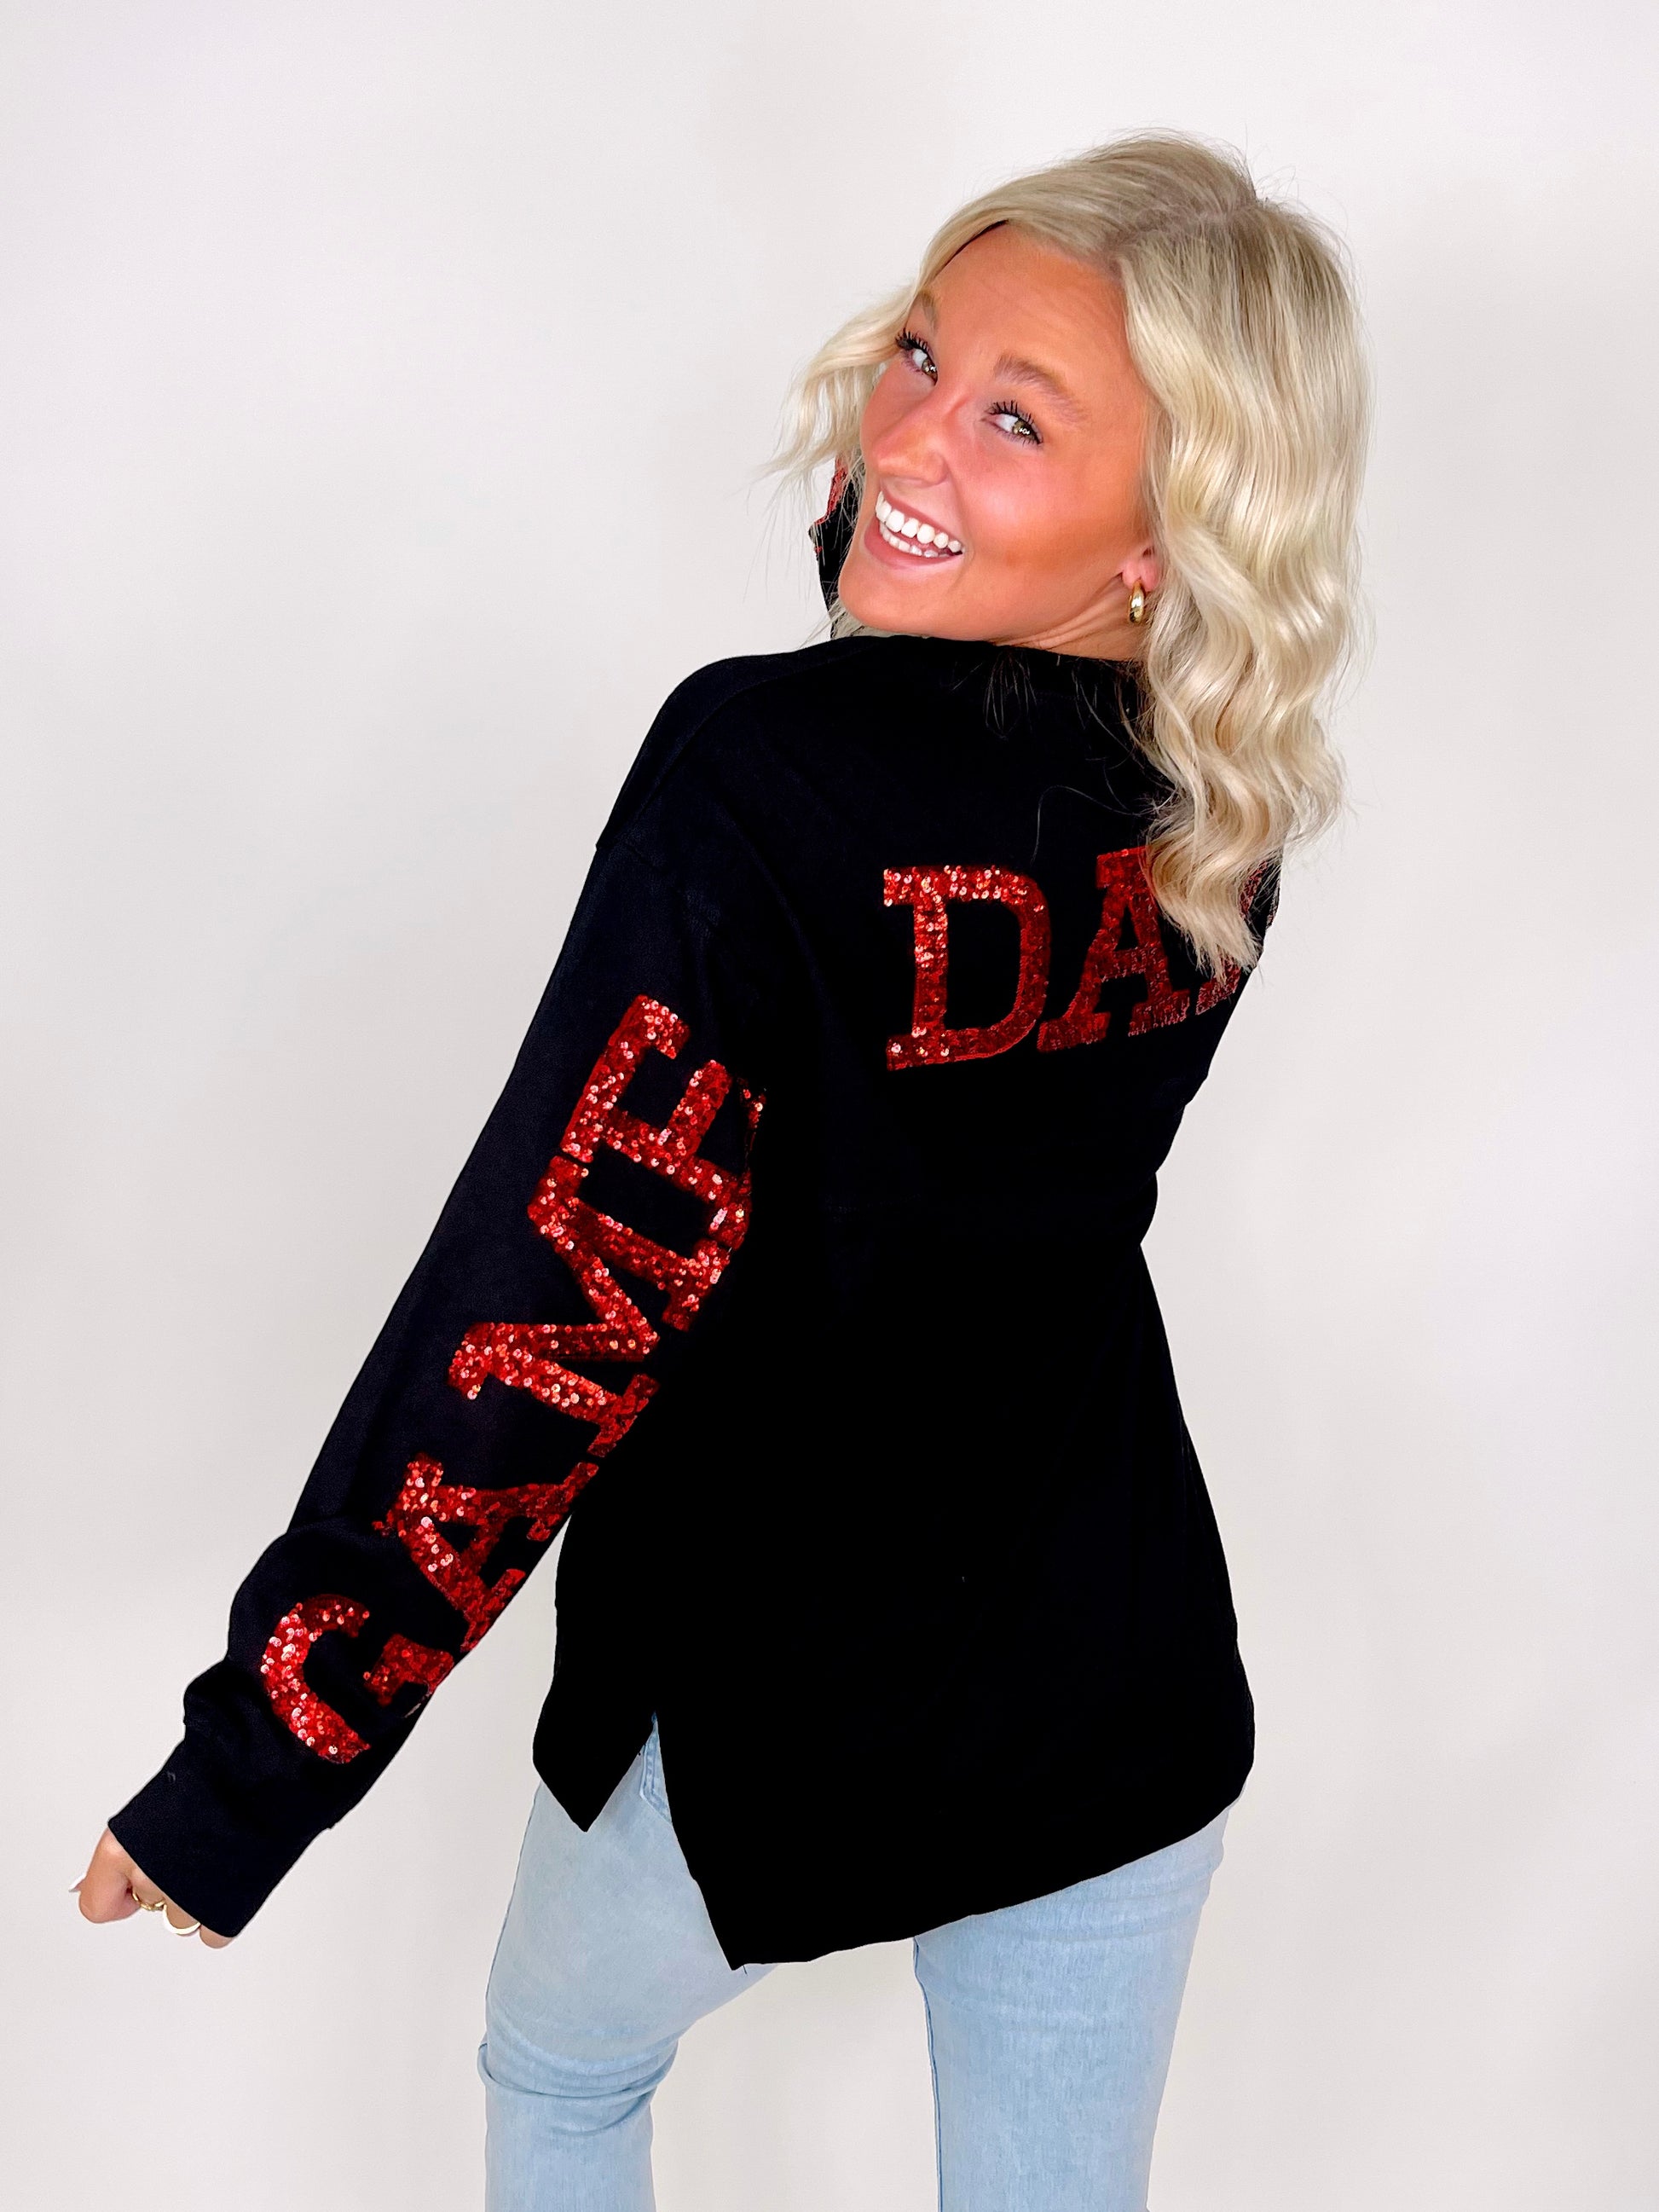 It's Game Day Y'all Tee-Long Sleeves-Fantastic Fawn-The Village Shoppe, Women’s Fashion Boutique, Shop Online and In Store - Located in Muscle Shoals, AL.